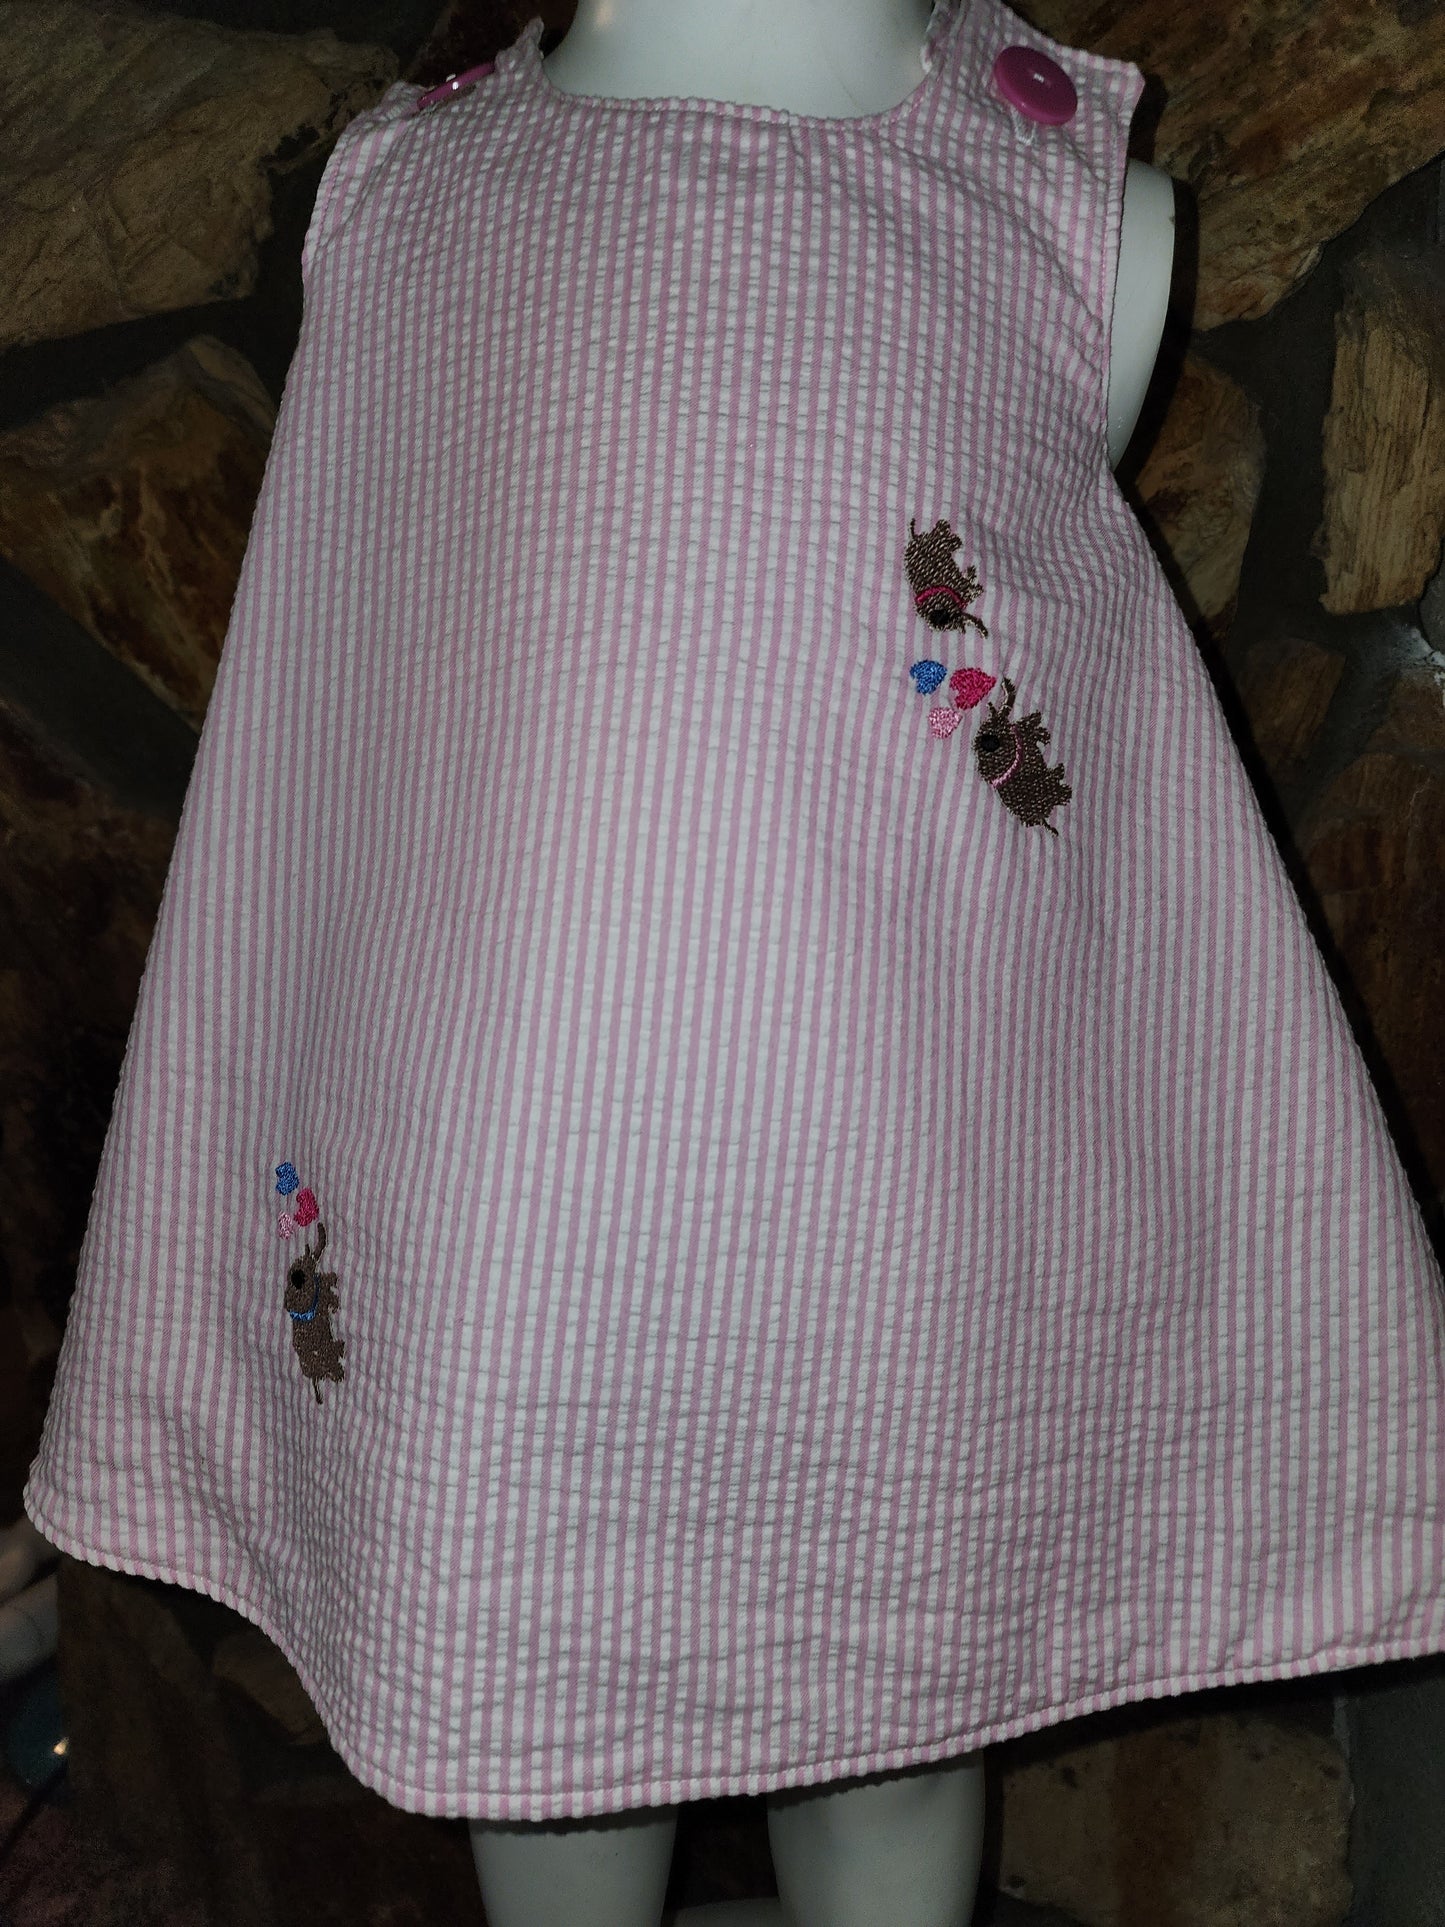 Pink and White Striped Elephant Themed Swing Top and Diaper Cover Size 9/12m